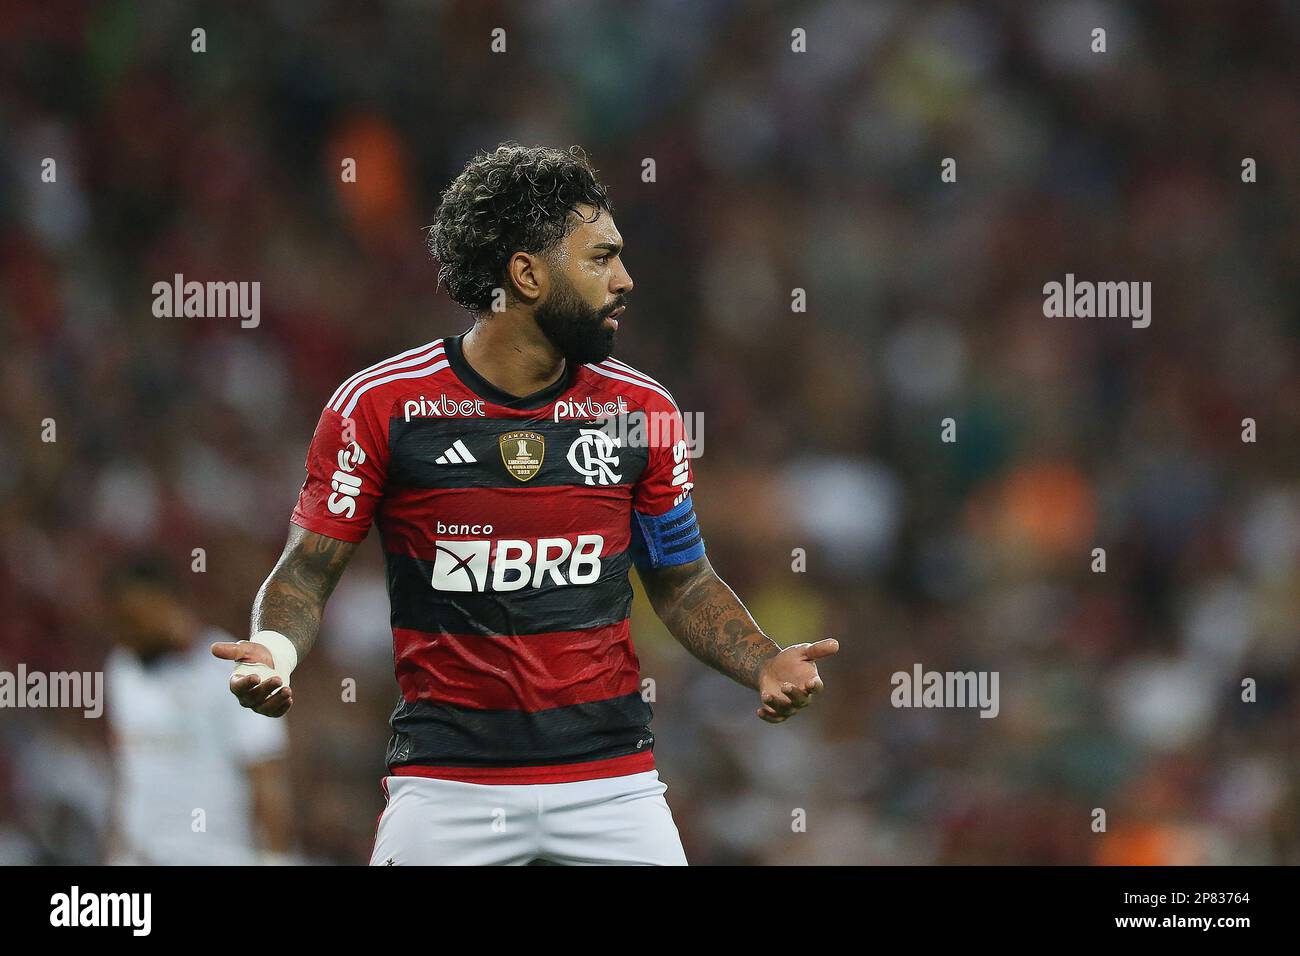 Rio de Janeiro, Brazil, 08th Mar, 2023. Gabriel Barbosa of Flamengo complains to the referee after his goal is annulled during the match between Flamengo and Fluminense, for the Championship Carioca 2023, at Maracana Stadium, in Rio de Janeiro on February 16. Photo: Daniel Castelo Branco/DiaEsportivo/Alamy Live News Stock Photo